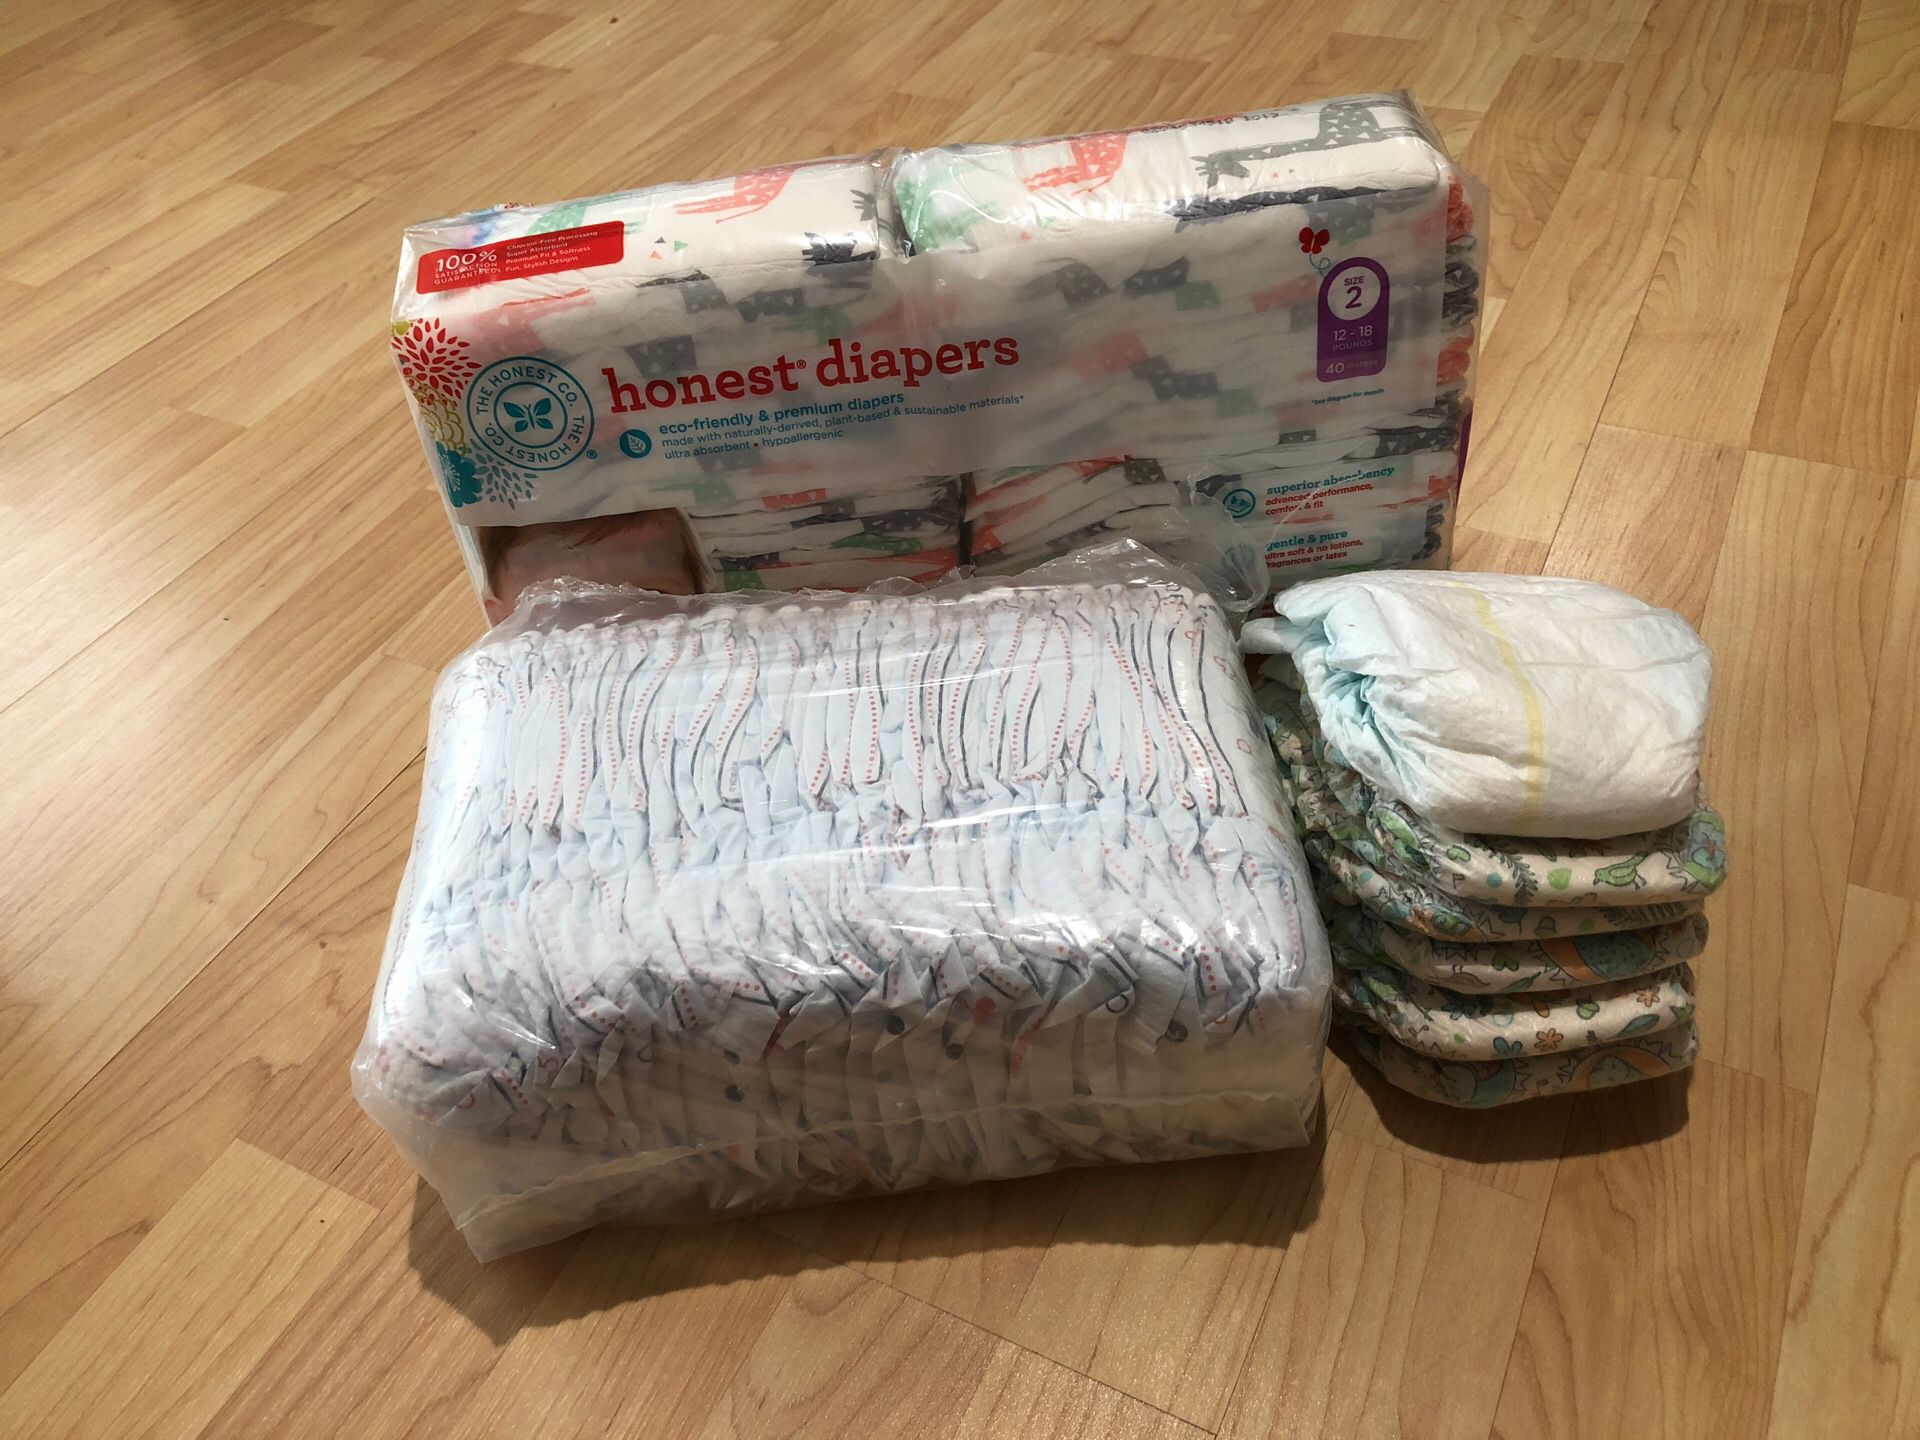 Honest Size 1 Diapers & more